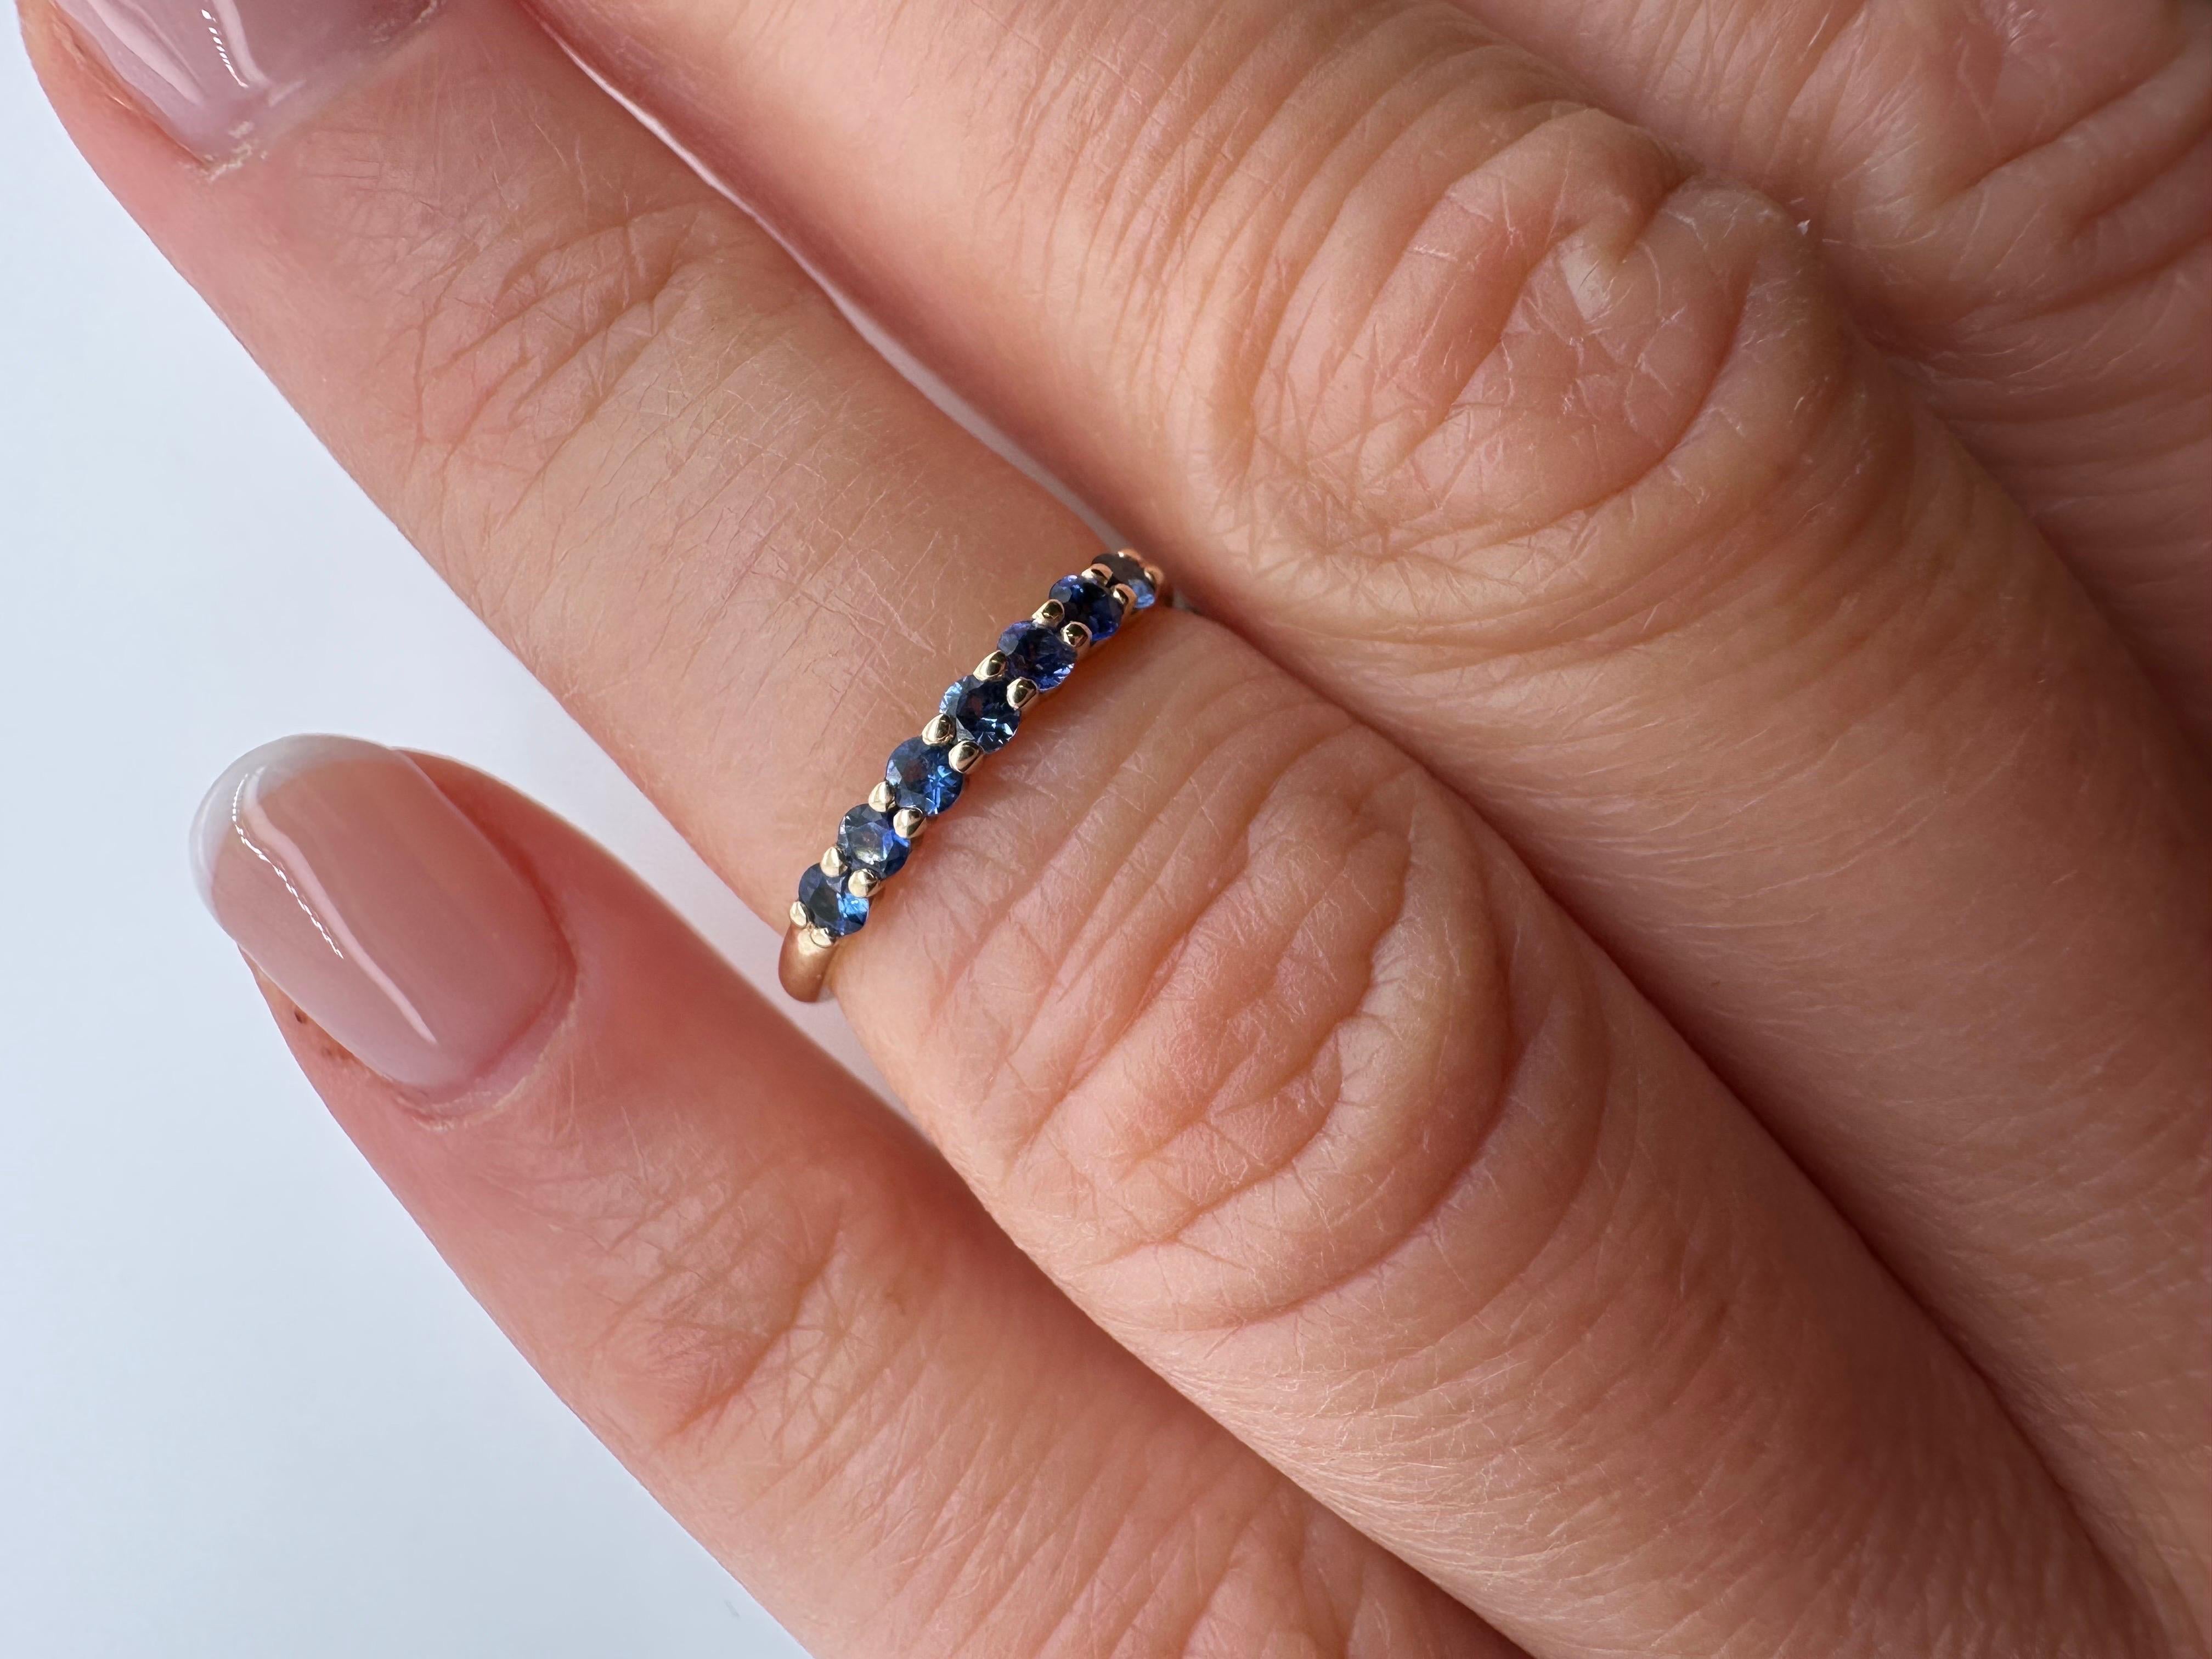 Such a cute wedding band made with ceylon sapphires in 14KT yellow gold.

Metal Type: 14KT

Natural Sapphire(s):
Color: Blue
Cut:Round
Carat: 0.29ct
Clarity: Slightly Included


Certificate of authenticity comes with purchase

ABOUT US
We are a